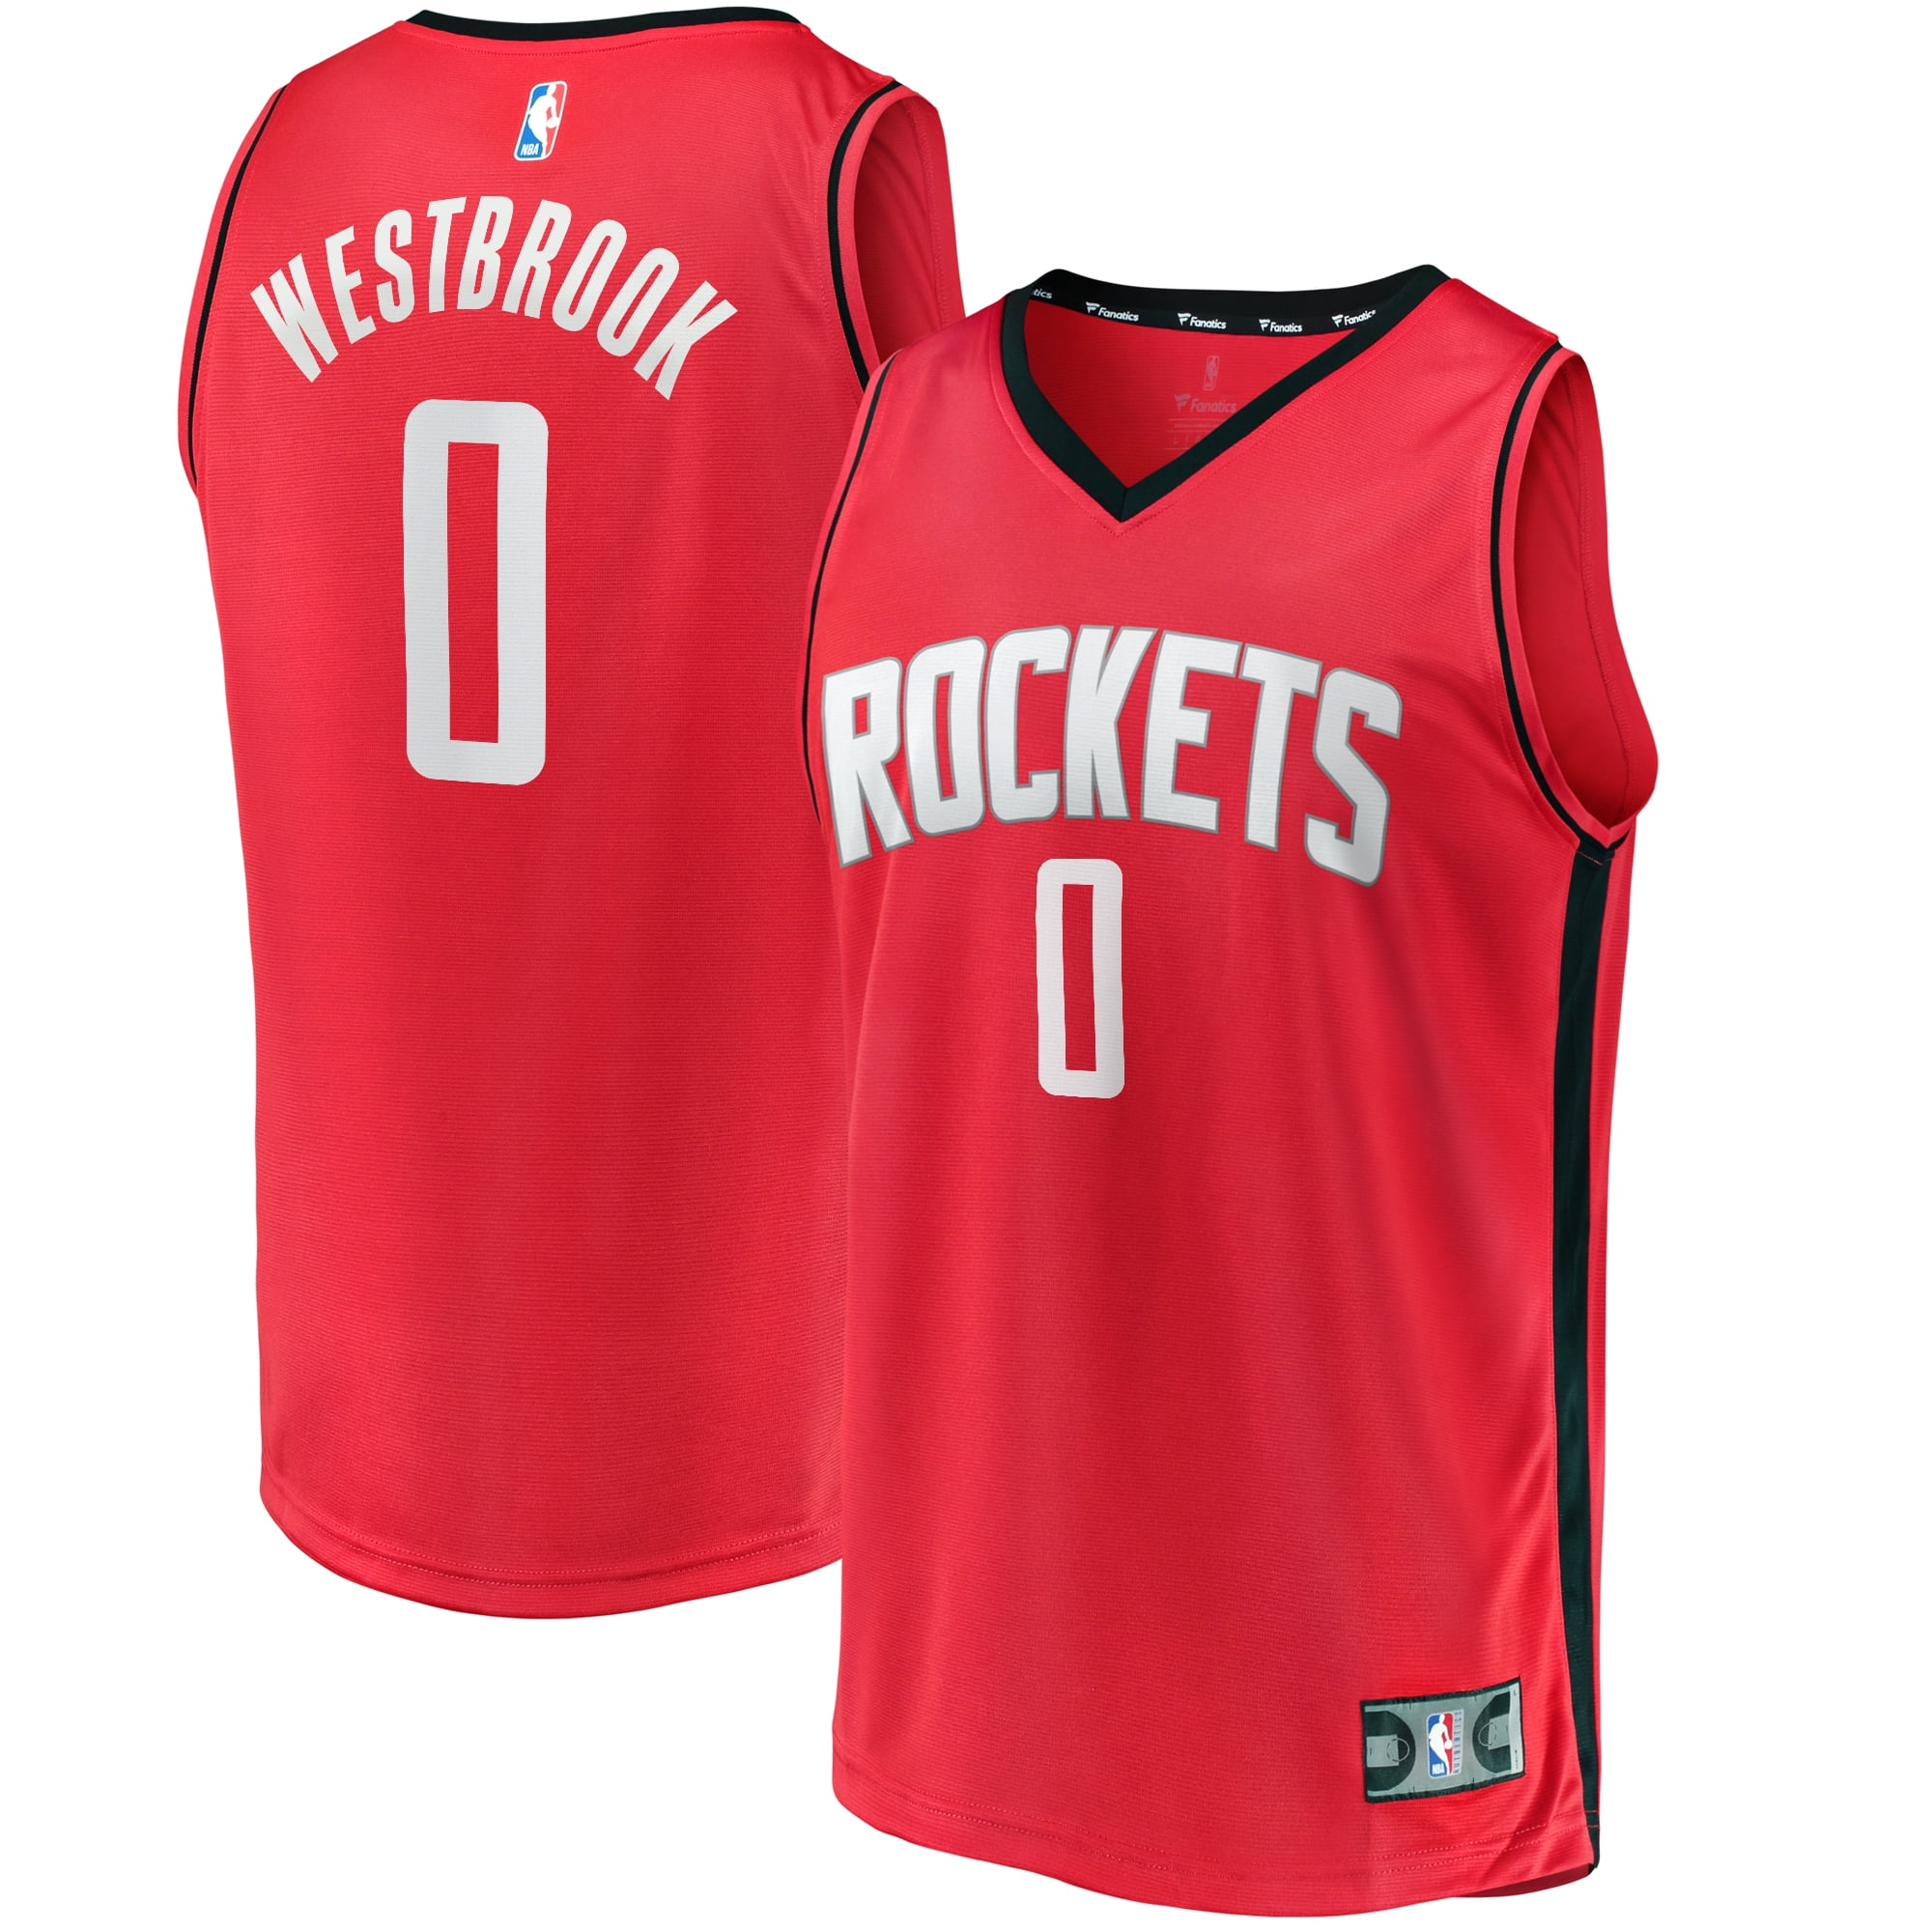 russell westbrook christmas jersey youth